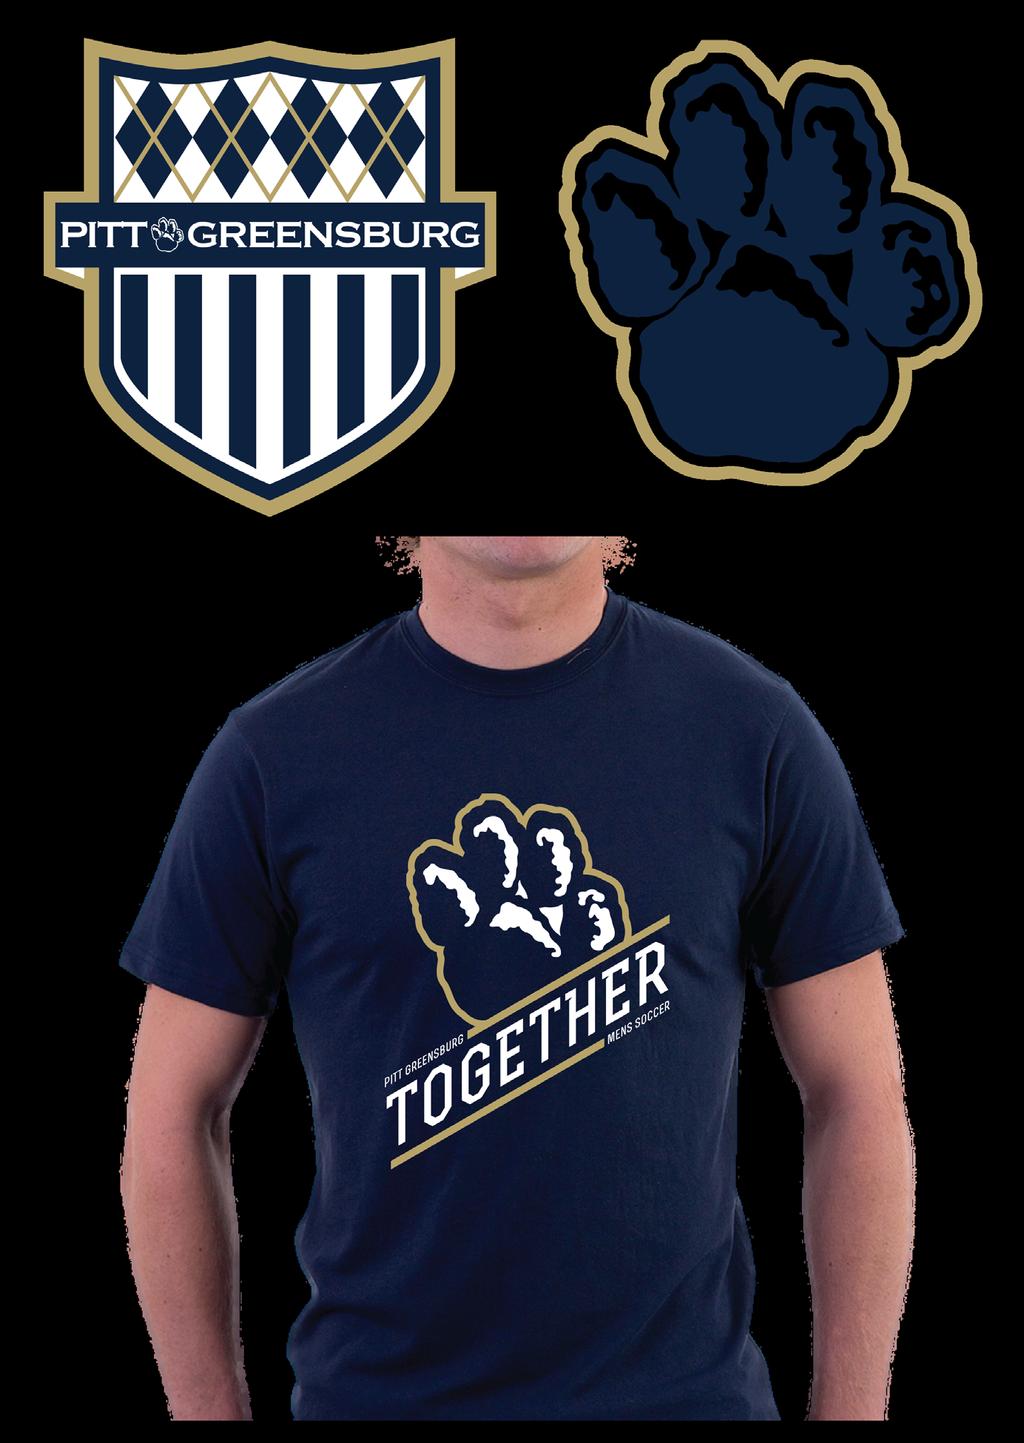 Pitt-Greensburg Soccer This set of logos was created at the direction of the new University of Pittsburgh at Greensburg mens soccer coach.